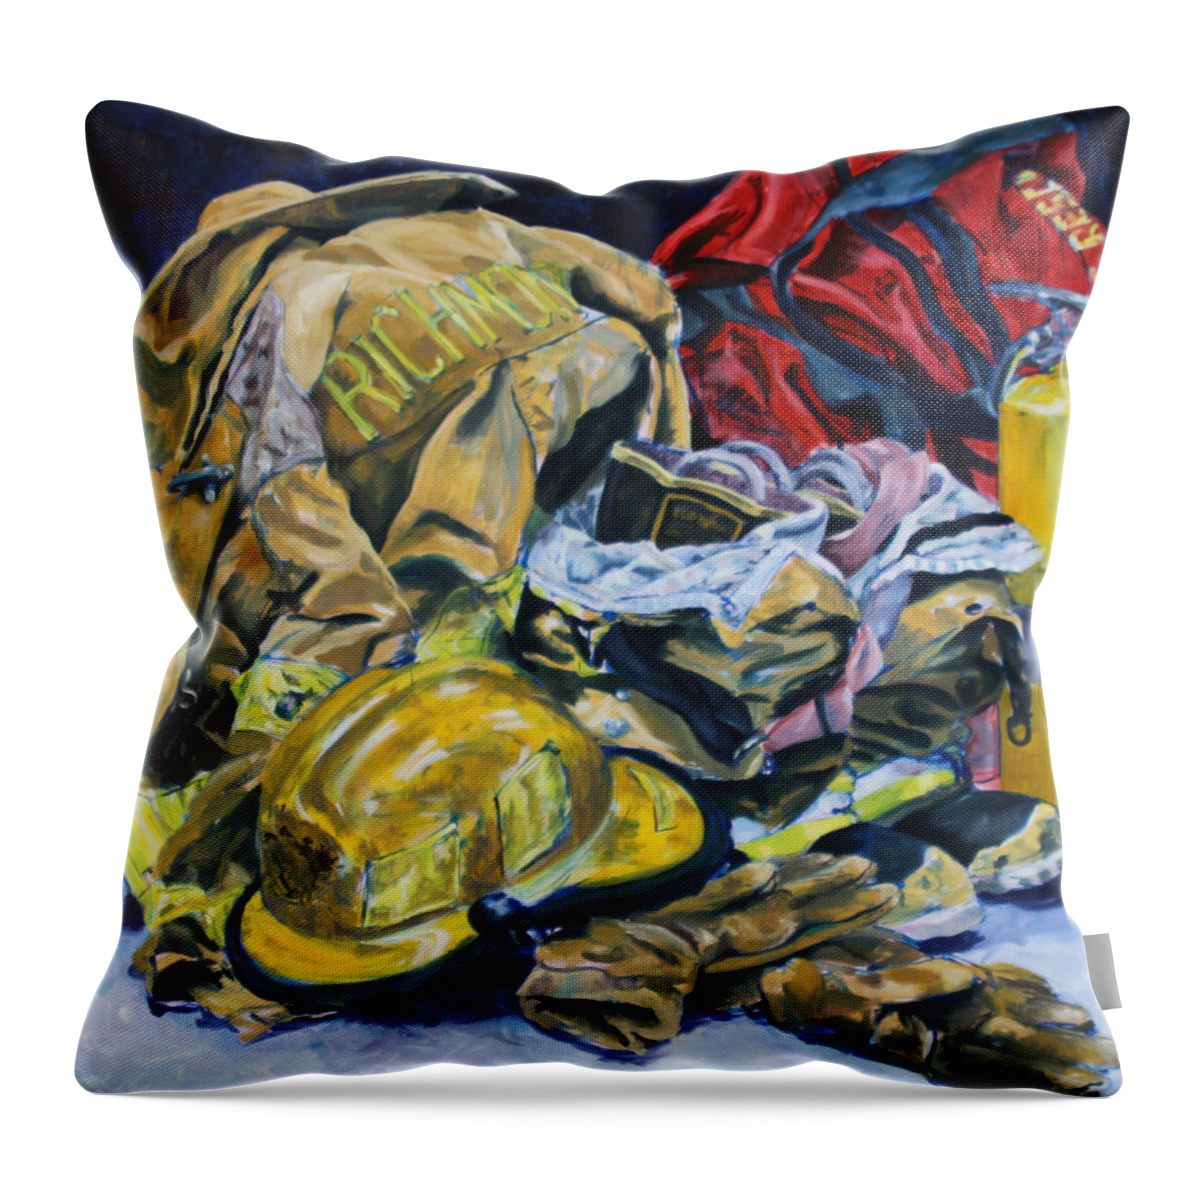 Fire Throw Pillow featuring the painting His Gear by Allison Fox